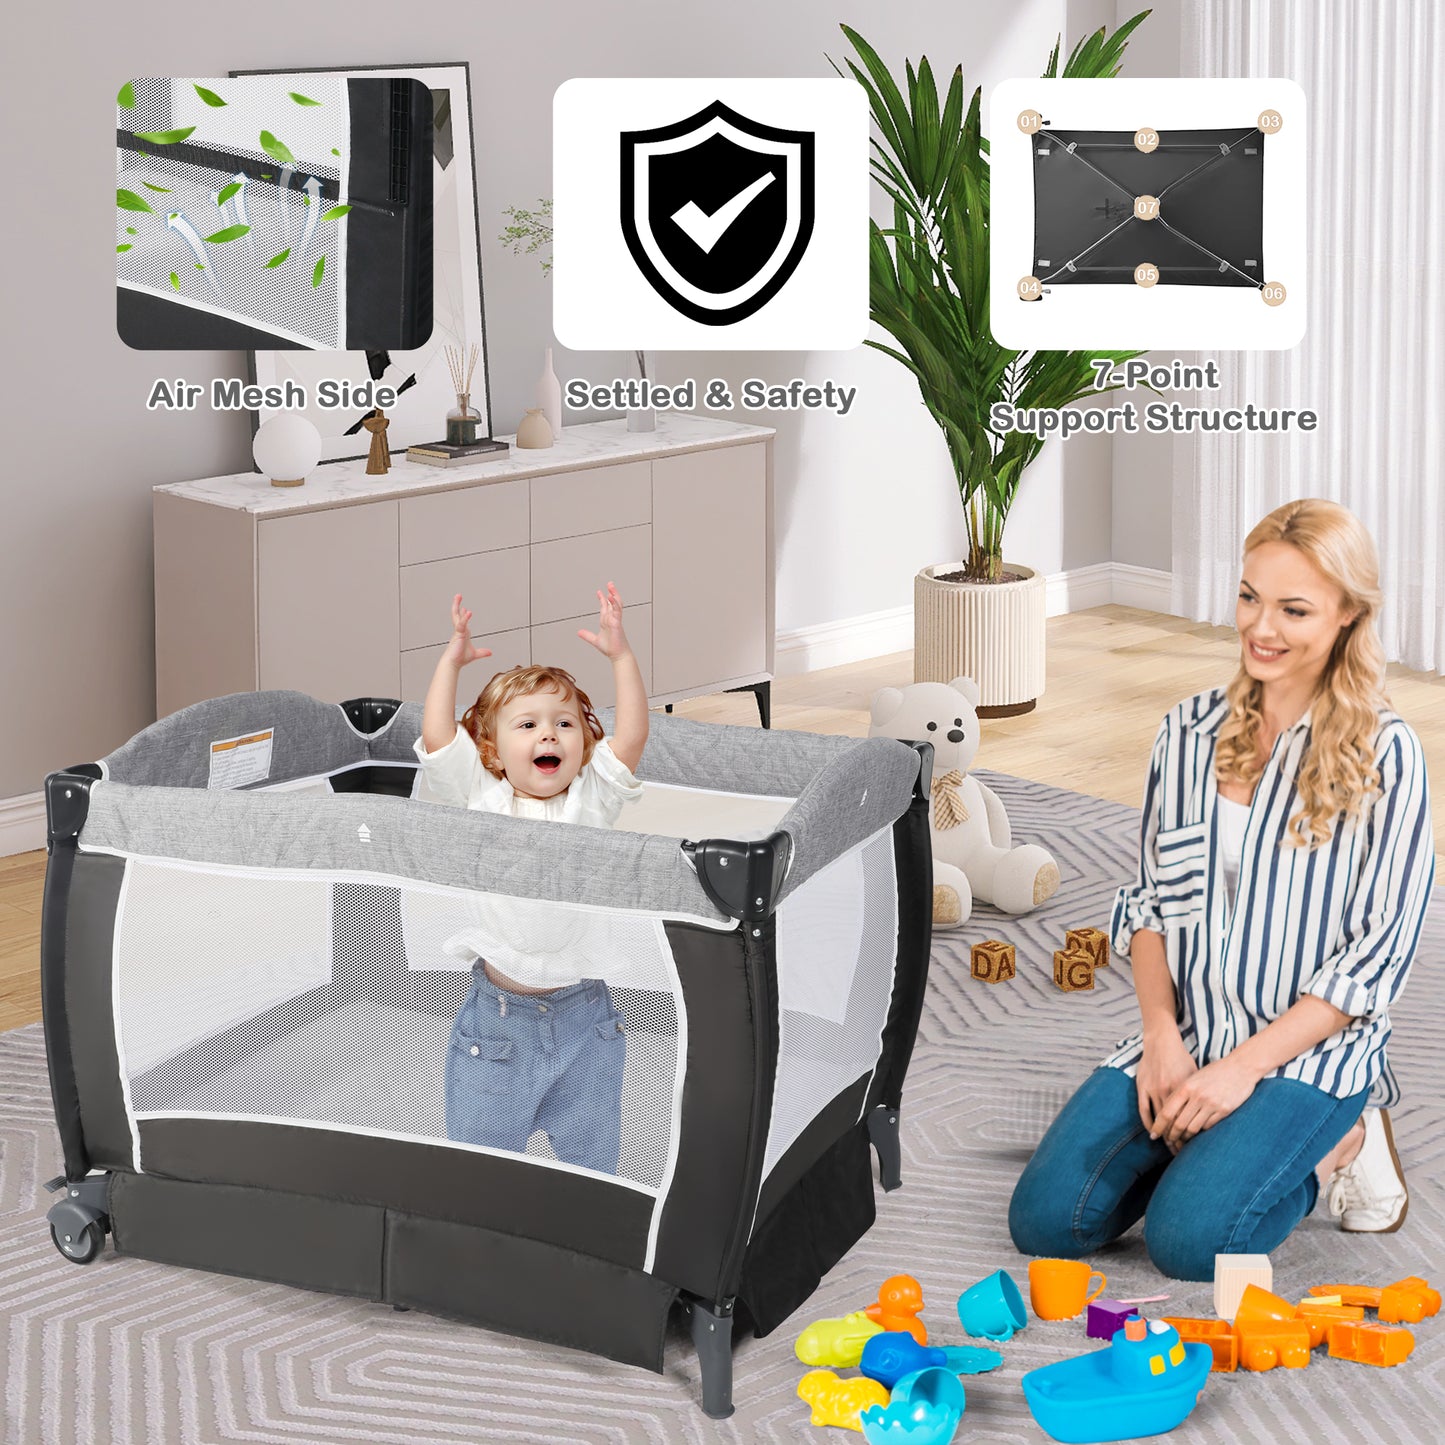 Unisex Nursery Center, Foldable Baby Playard with Changing Table for Newborn